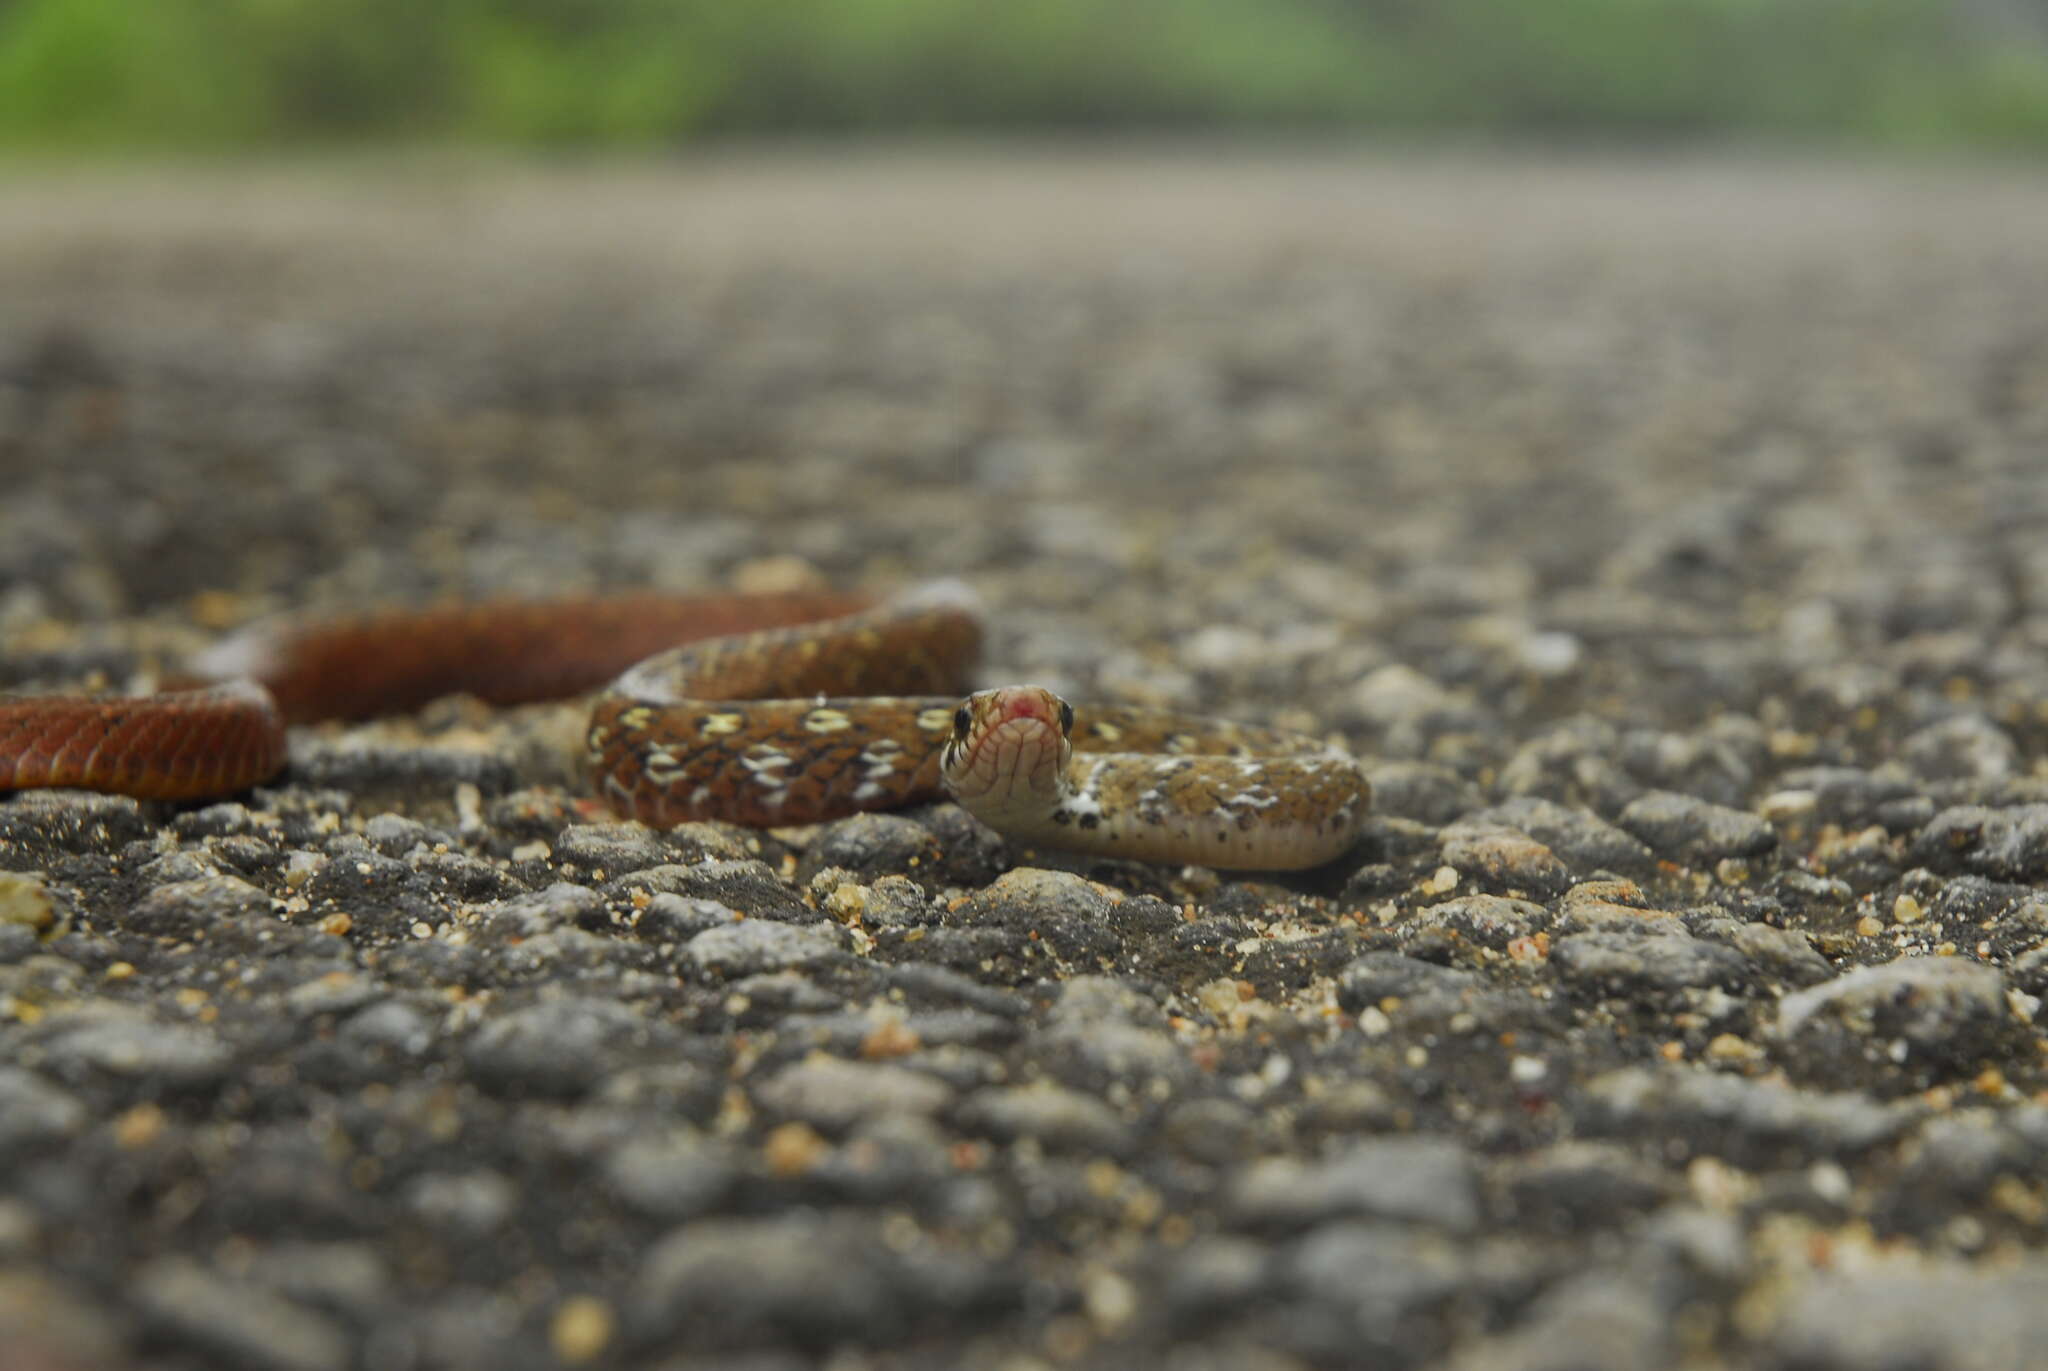 Image of Beddome’s Keelback